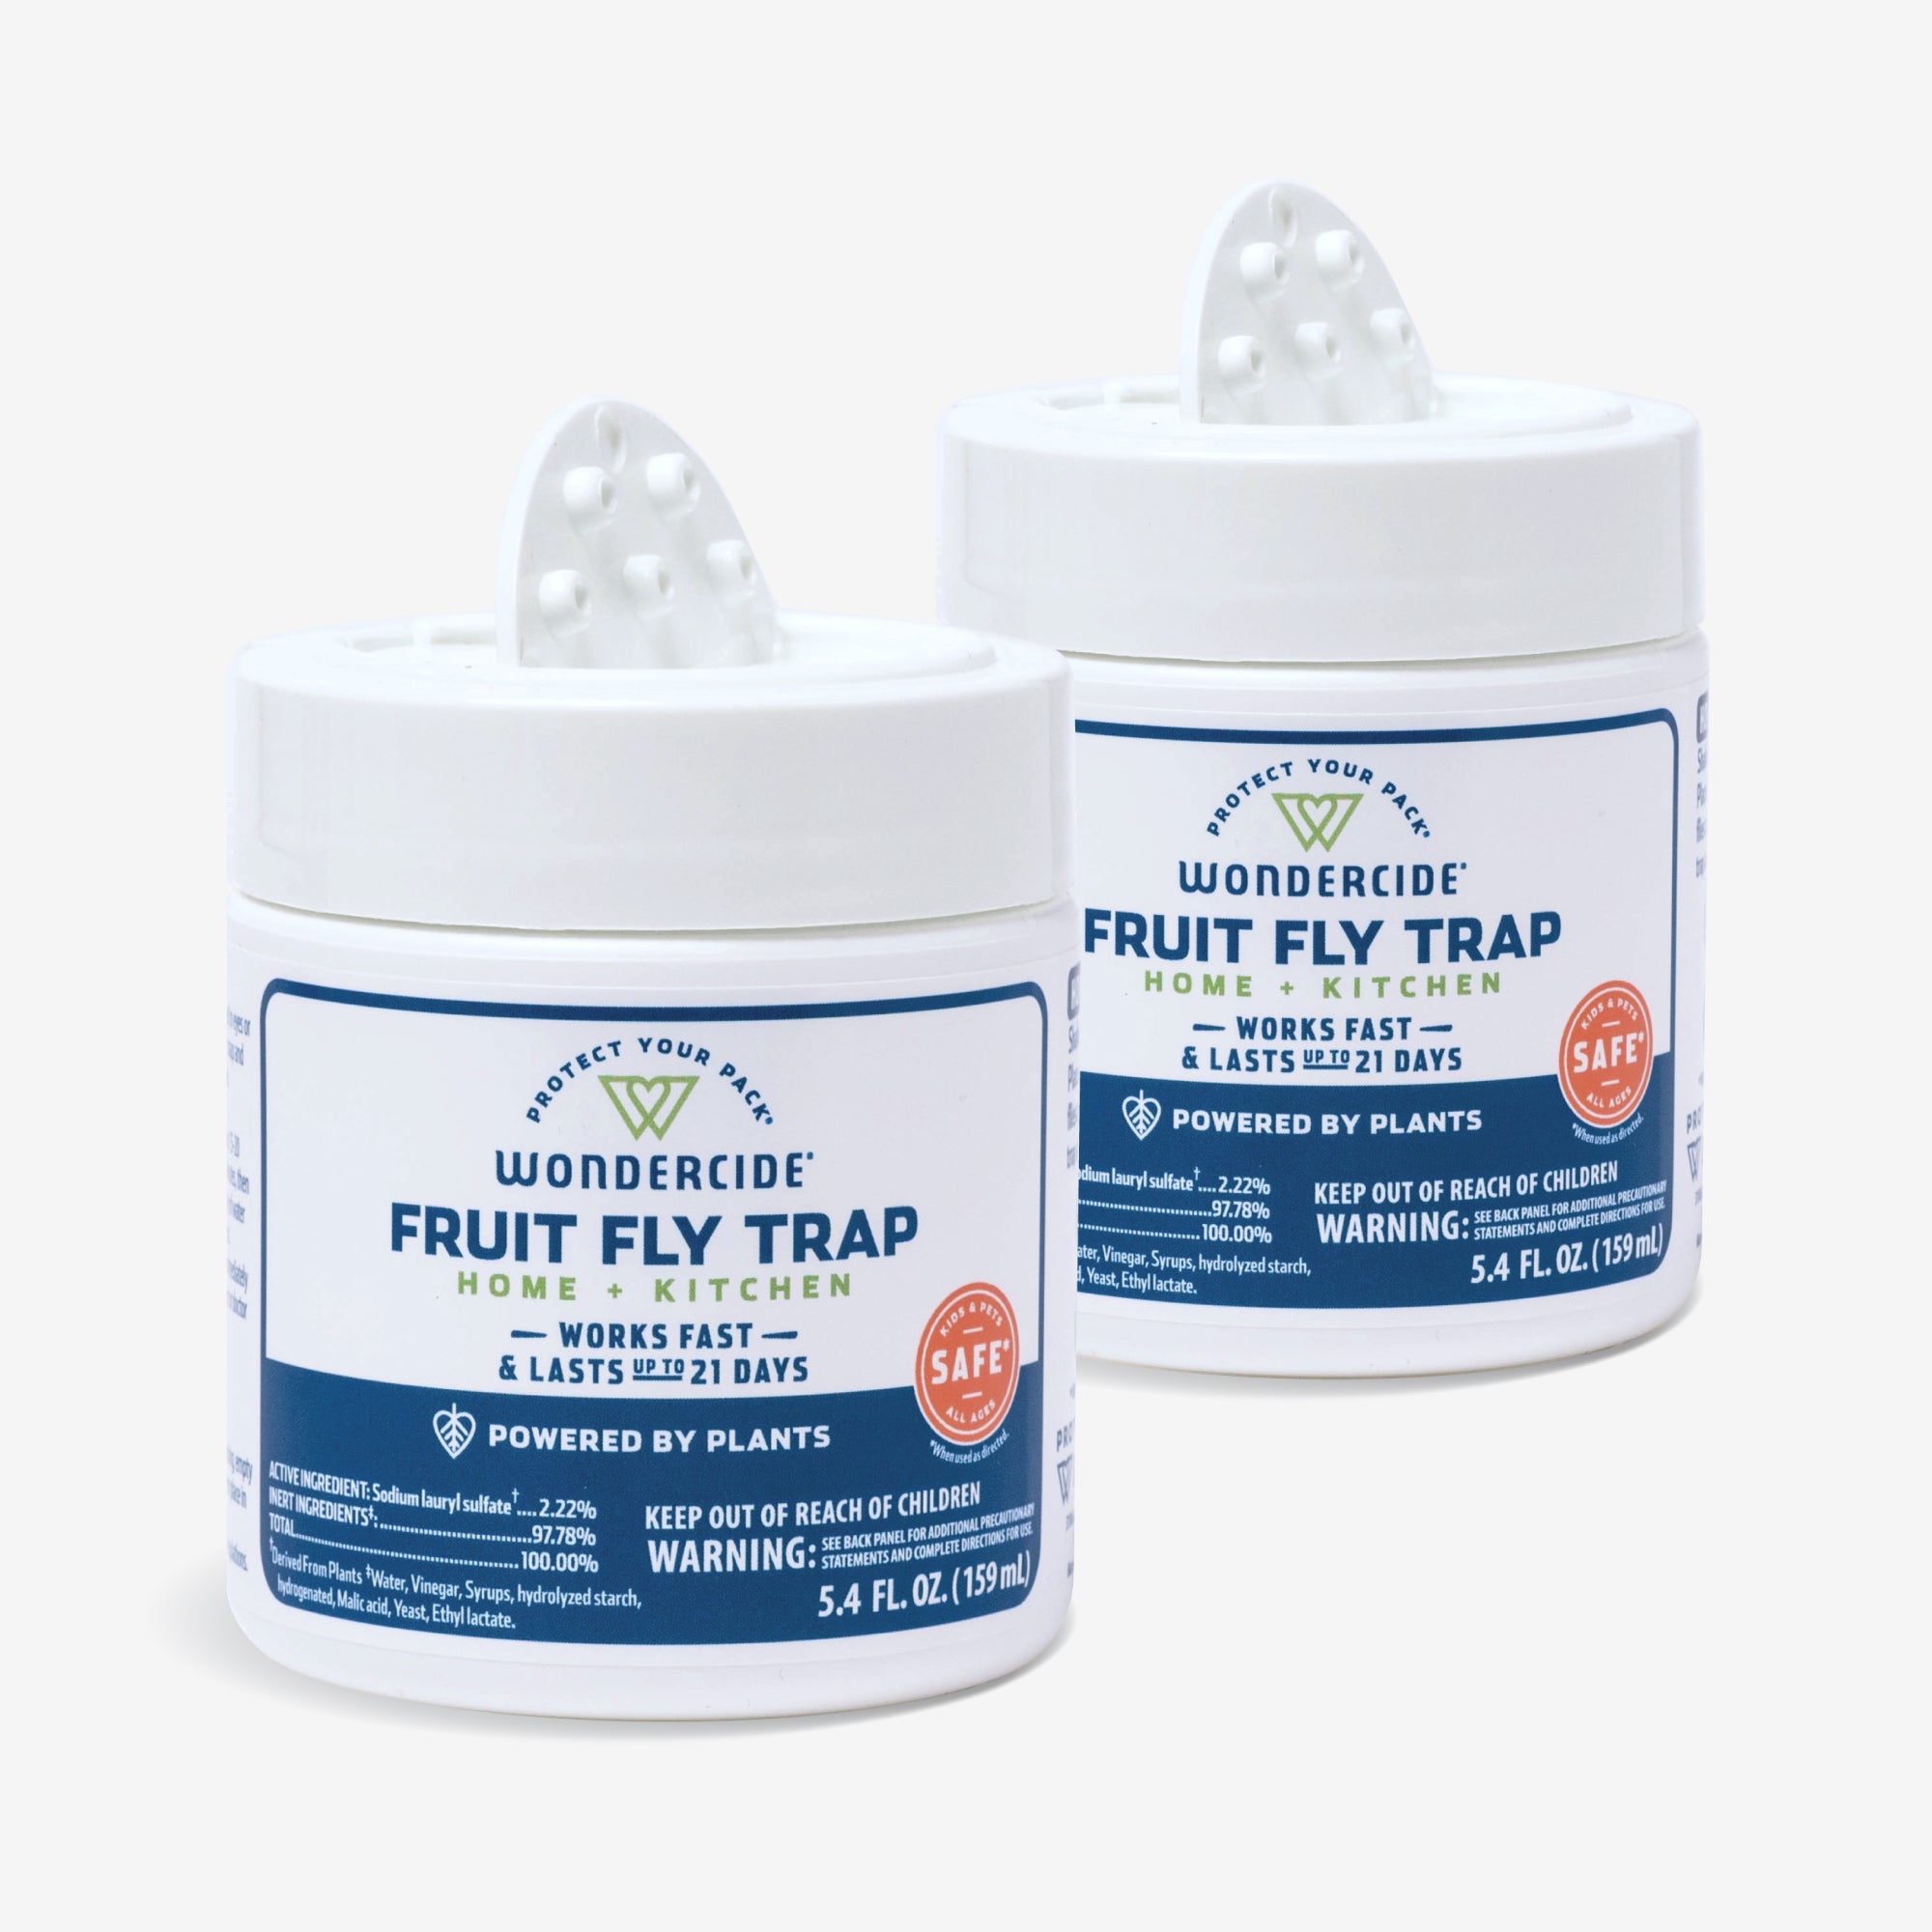 Wondercide - Fruit Fly Trap for Kitchen, Home, and Indoor Areas - Fruit Fly  Killer - Pet and People Safe - Made in USA & Plant Based - 5.4 oz - 2 Pack